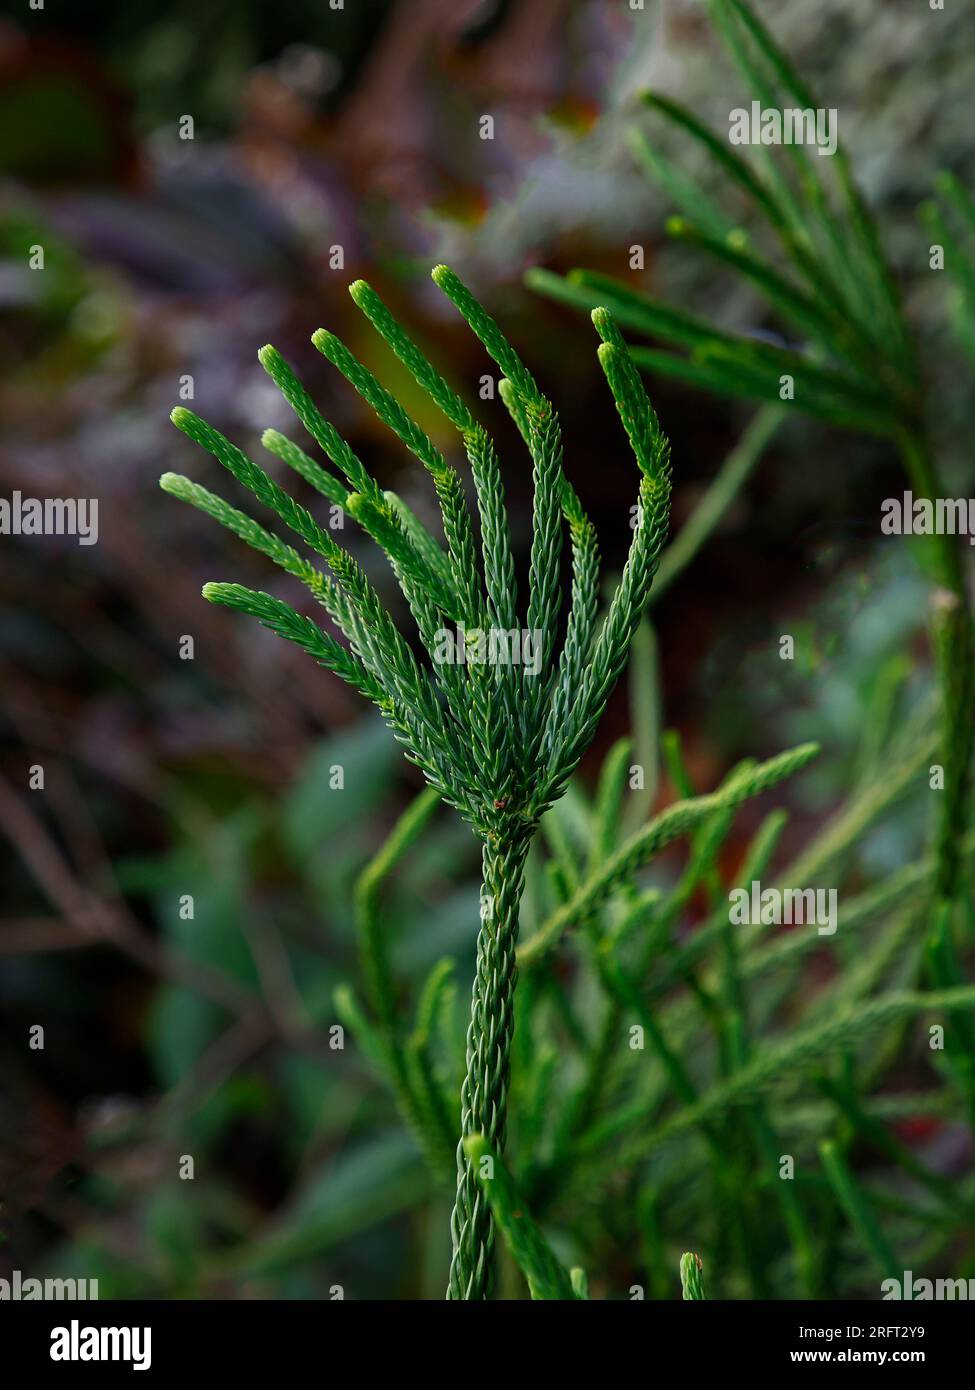 Closeup of a small part of the evergreen garden tree cryptomeria japonica araucarioides. Stock Photo